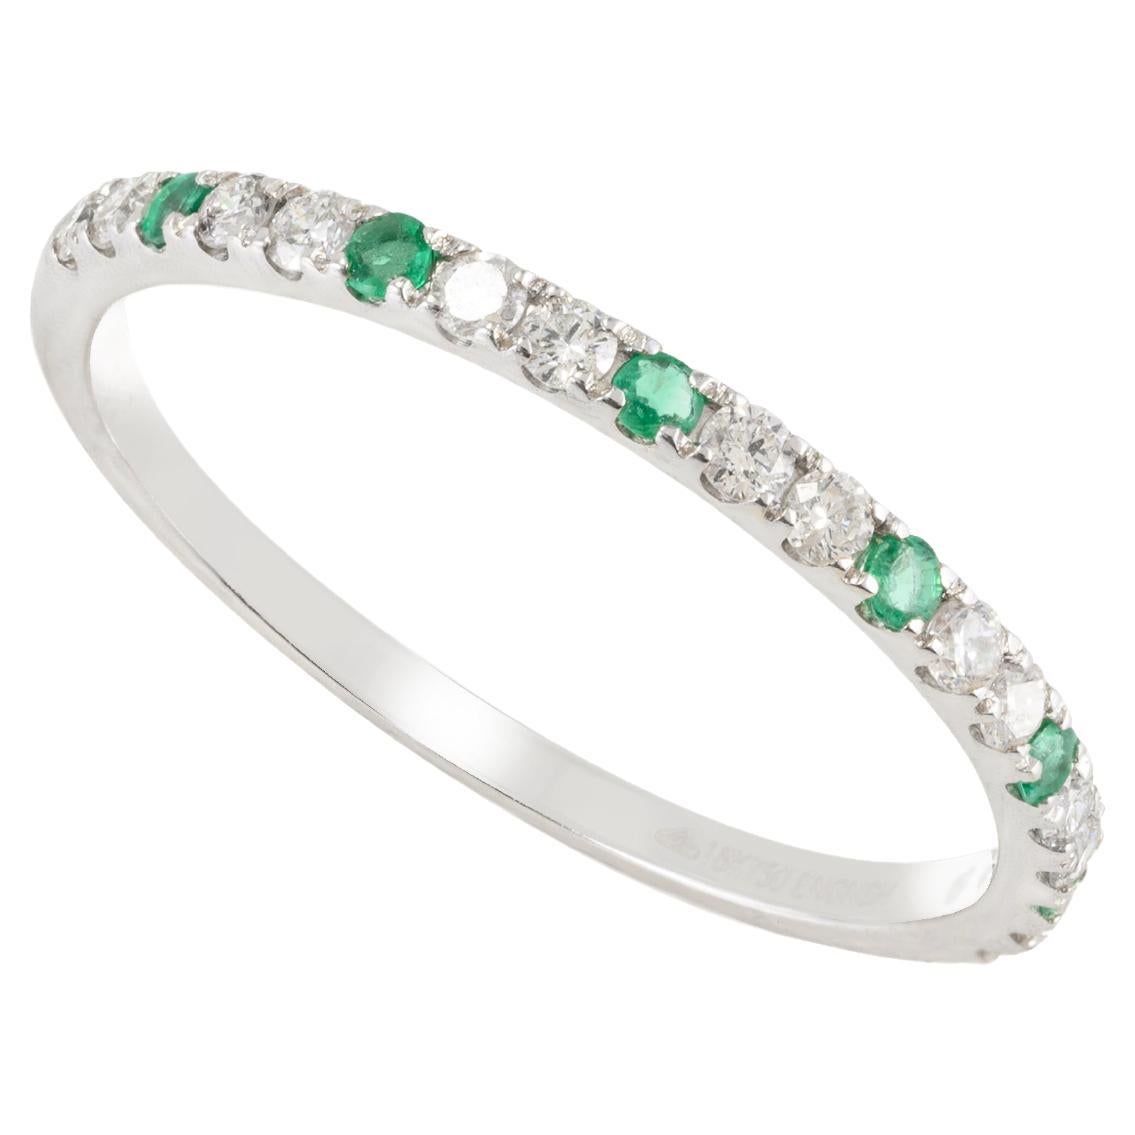 Dainty Diamond and Emerald Half Eternity Stacking Band Ring 18k Solid White Gold